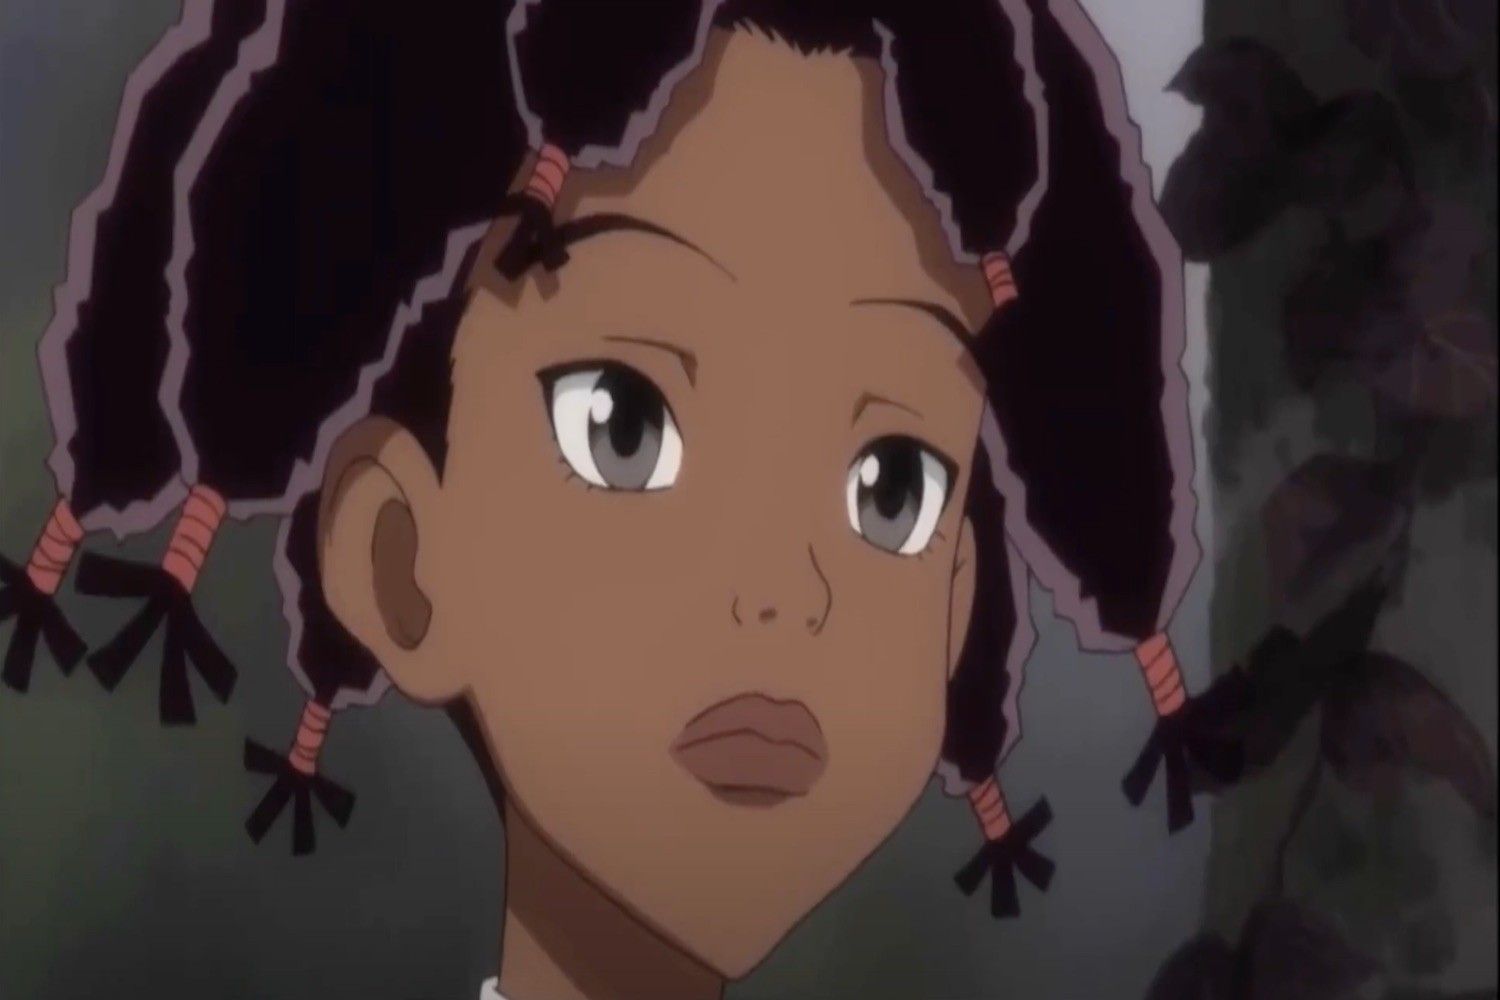 Anime, Art, Beats & Sake: The intersection of Black and Japanese culture -  HYFIN